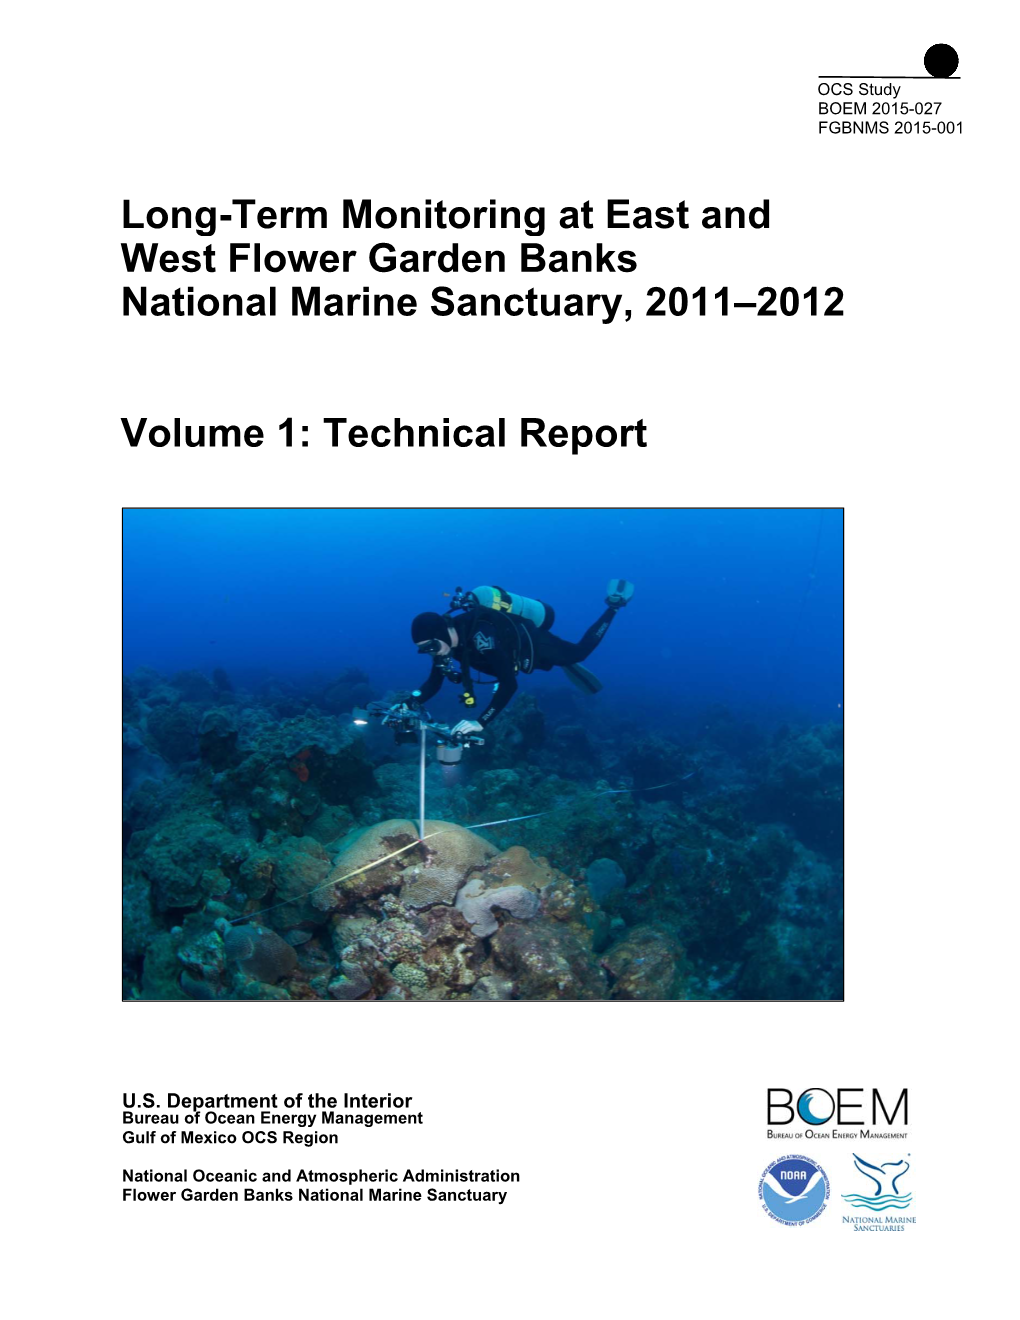 Long-Term Monitoring at East and West Flower Garden Banks National Marine Sanctuary, 2011–2012